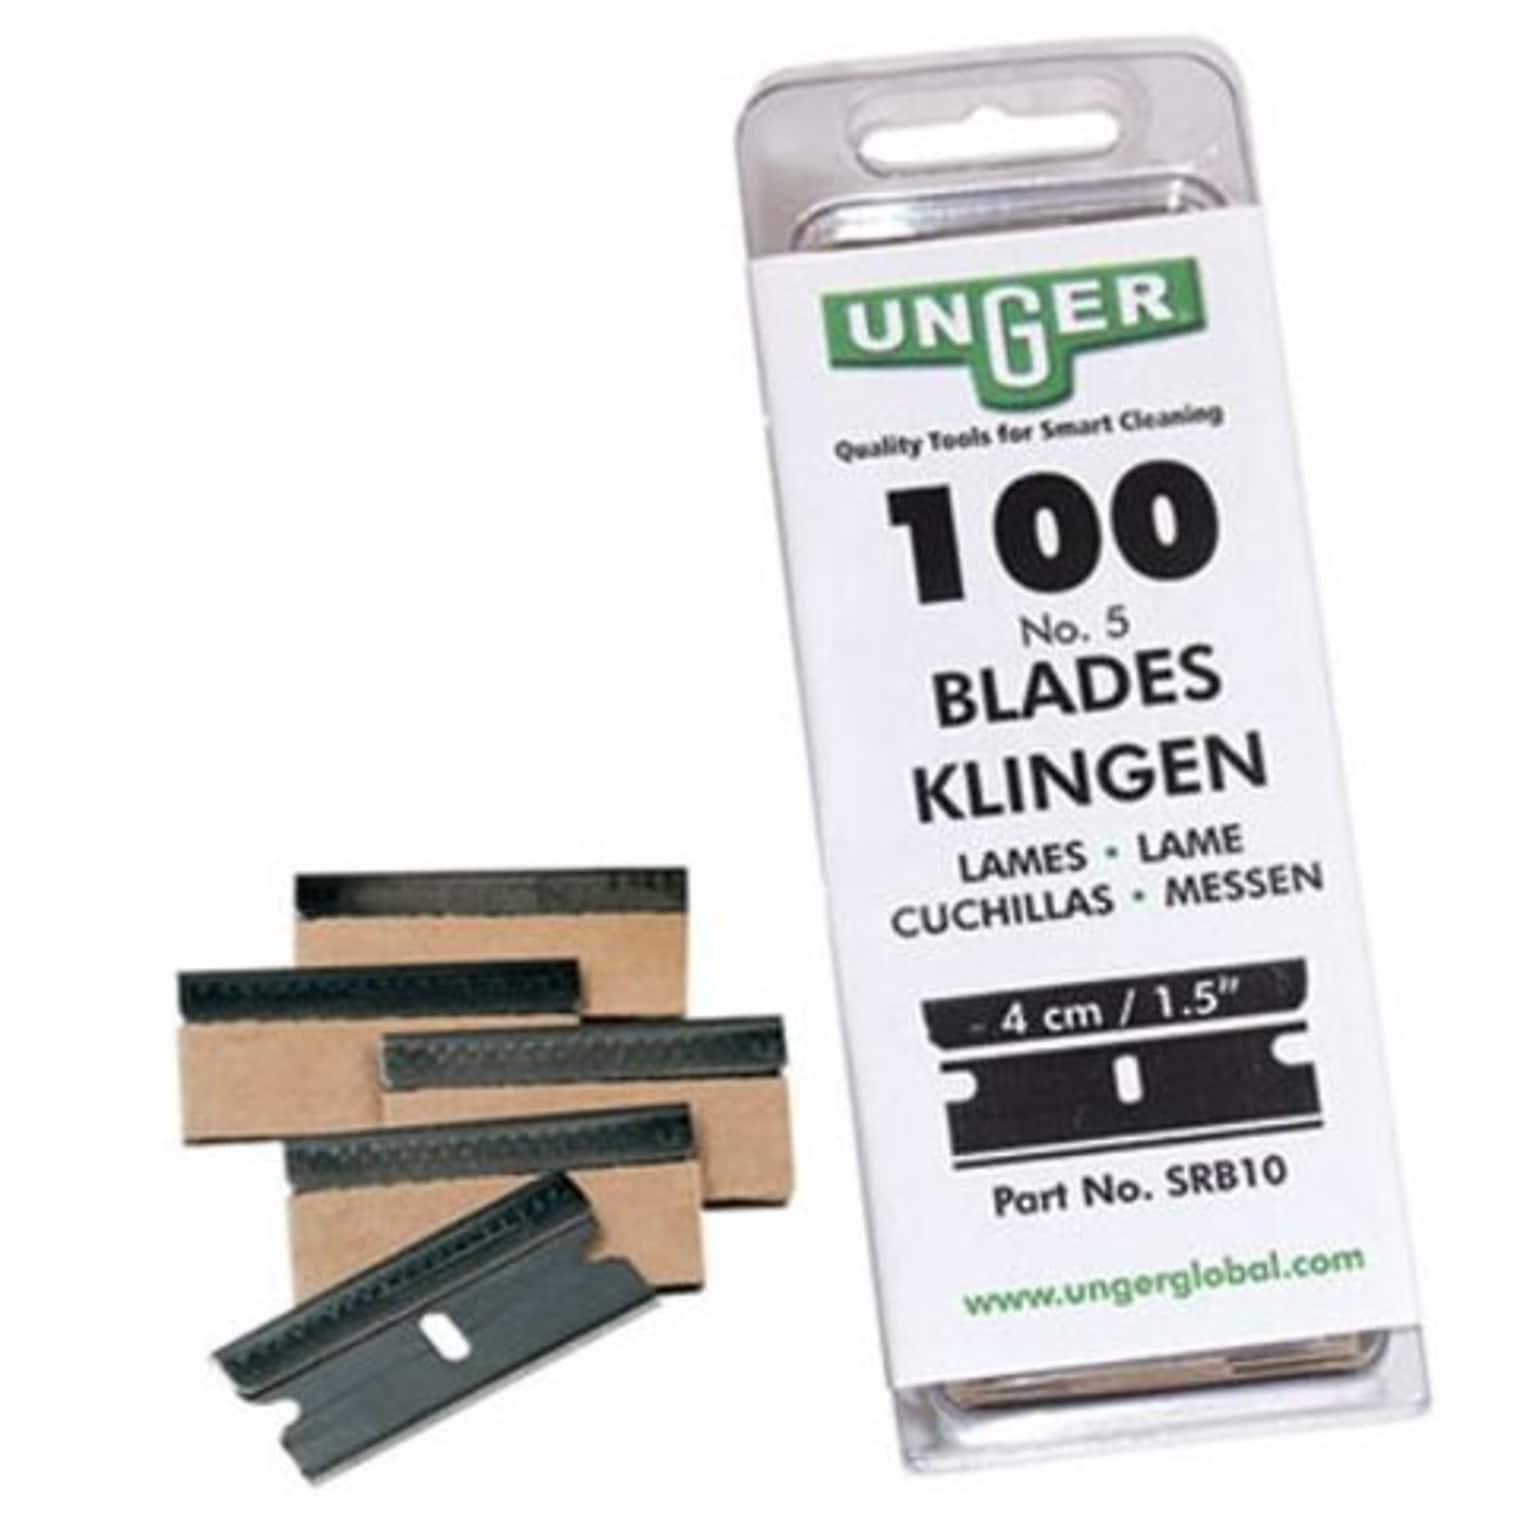 Unger Safety Scraper Replacement Blades, #9, Stainless Steel, 100/Box (UNGSRB30)